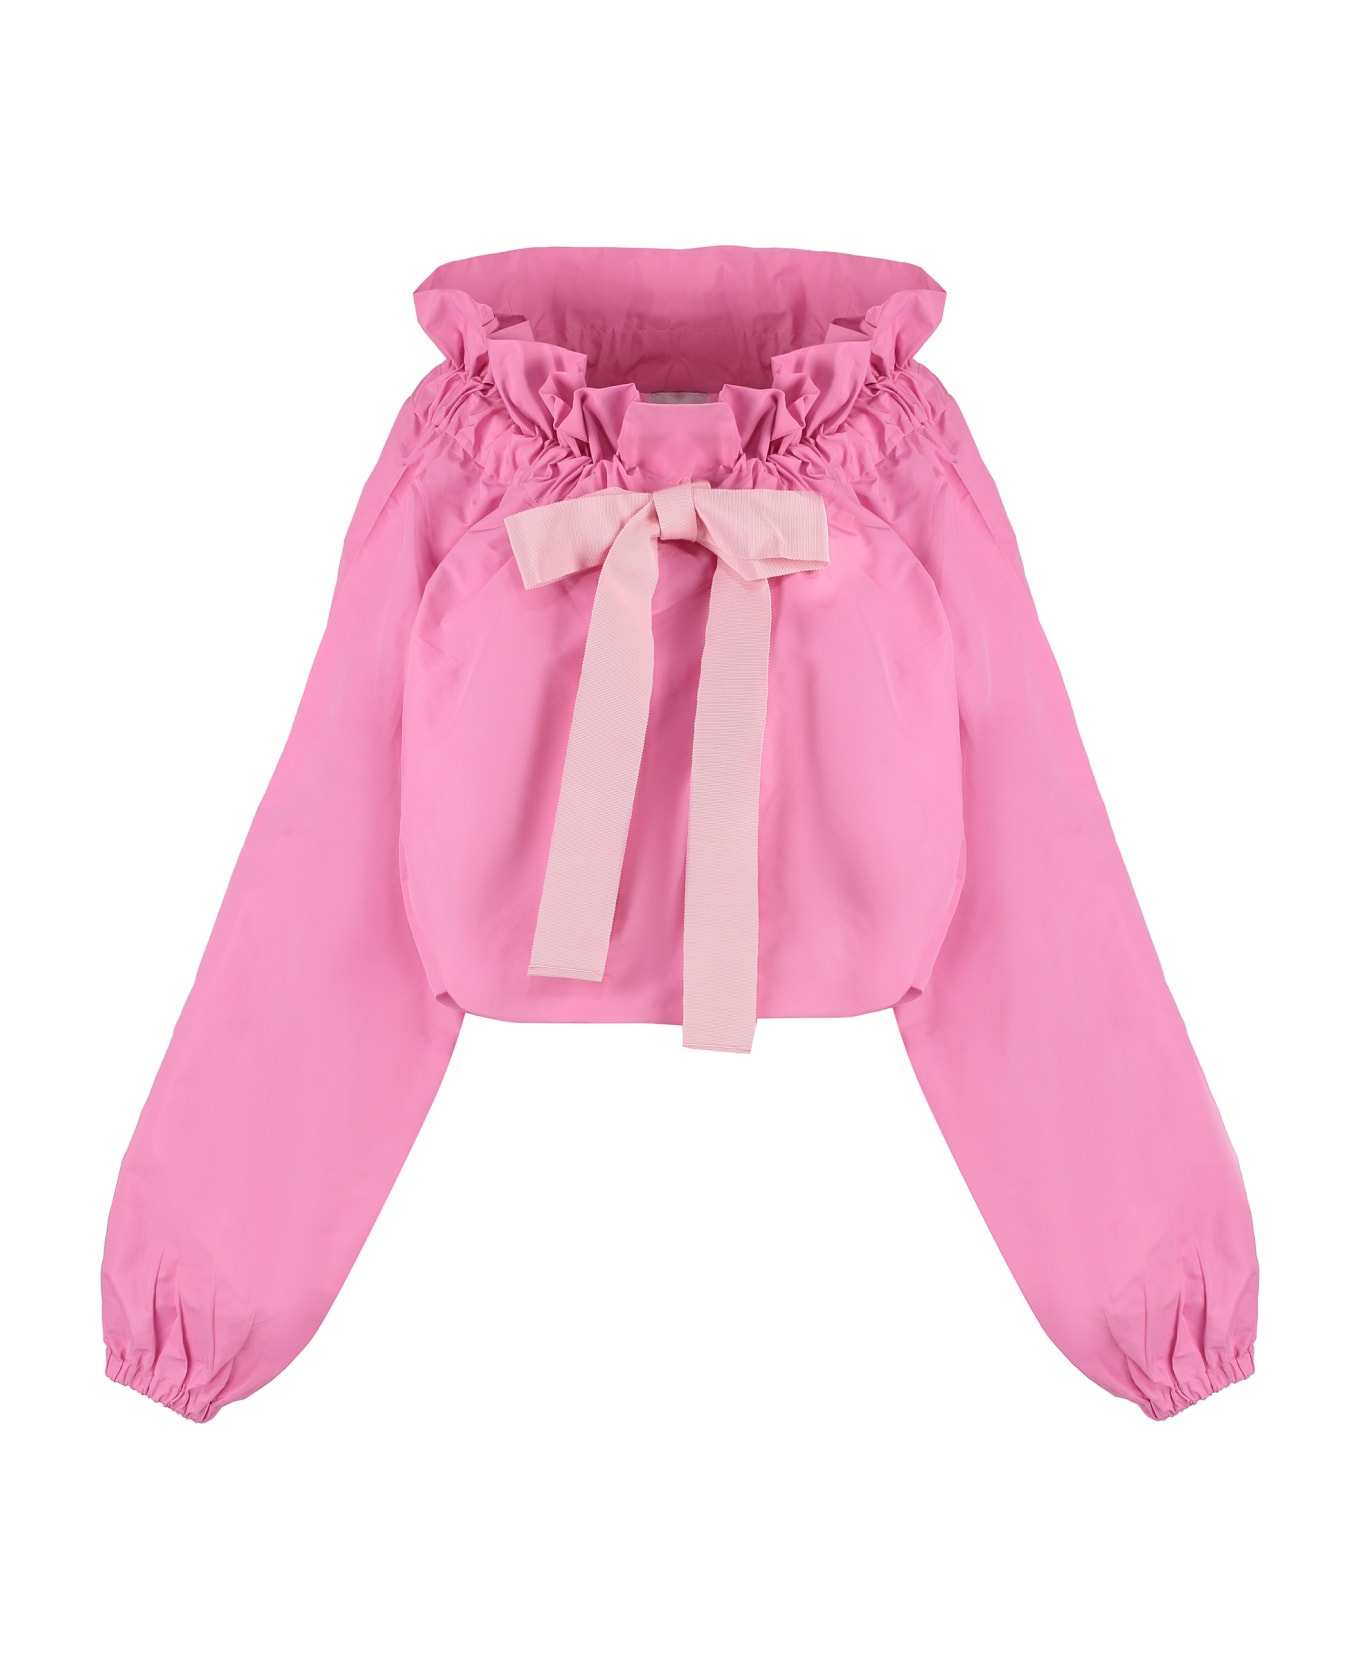 Patou Puffed Sleeves Blouse - Pink